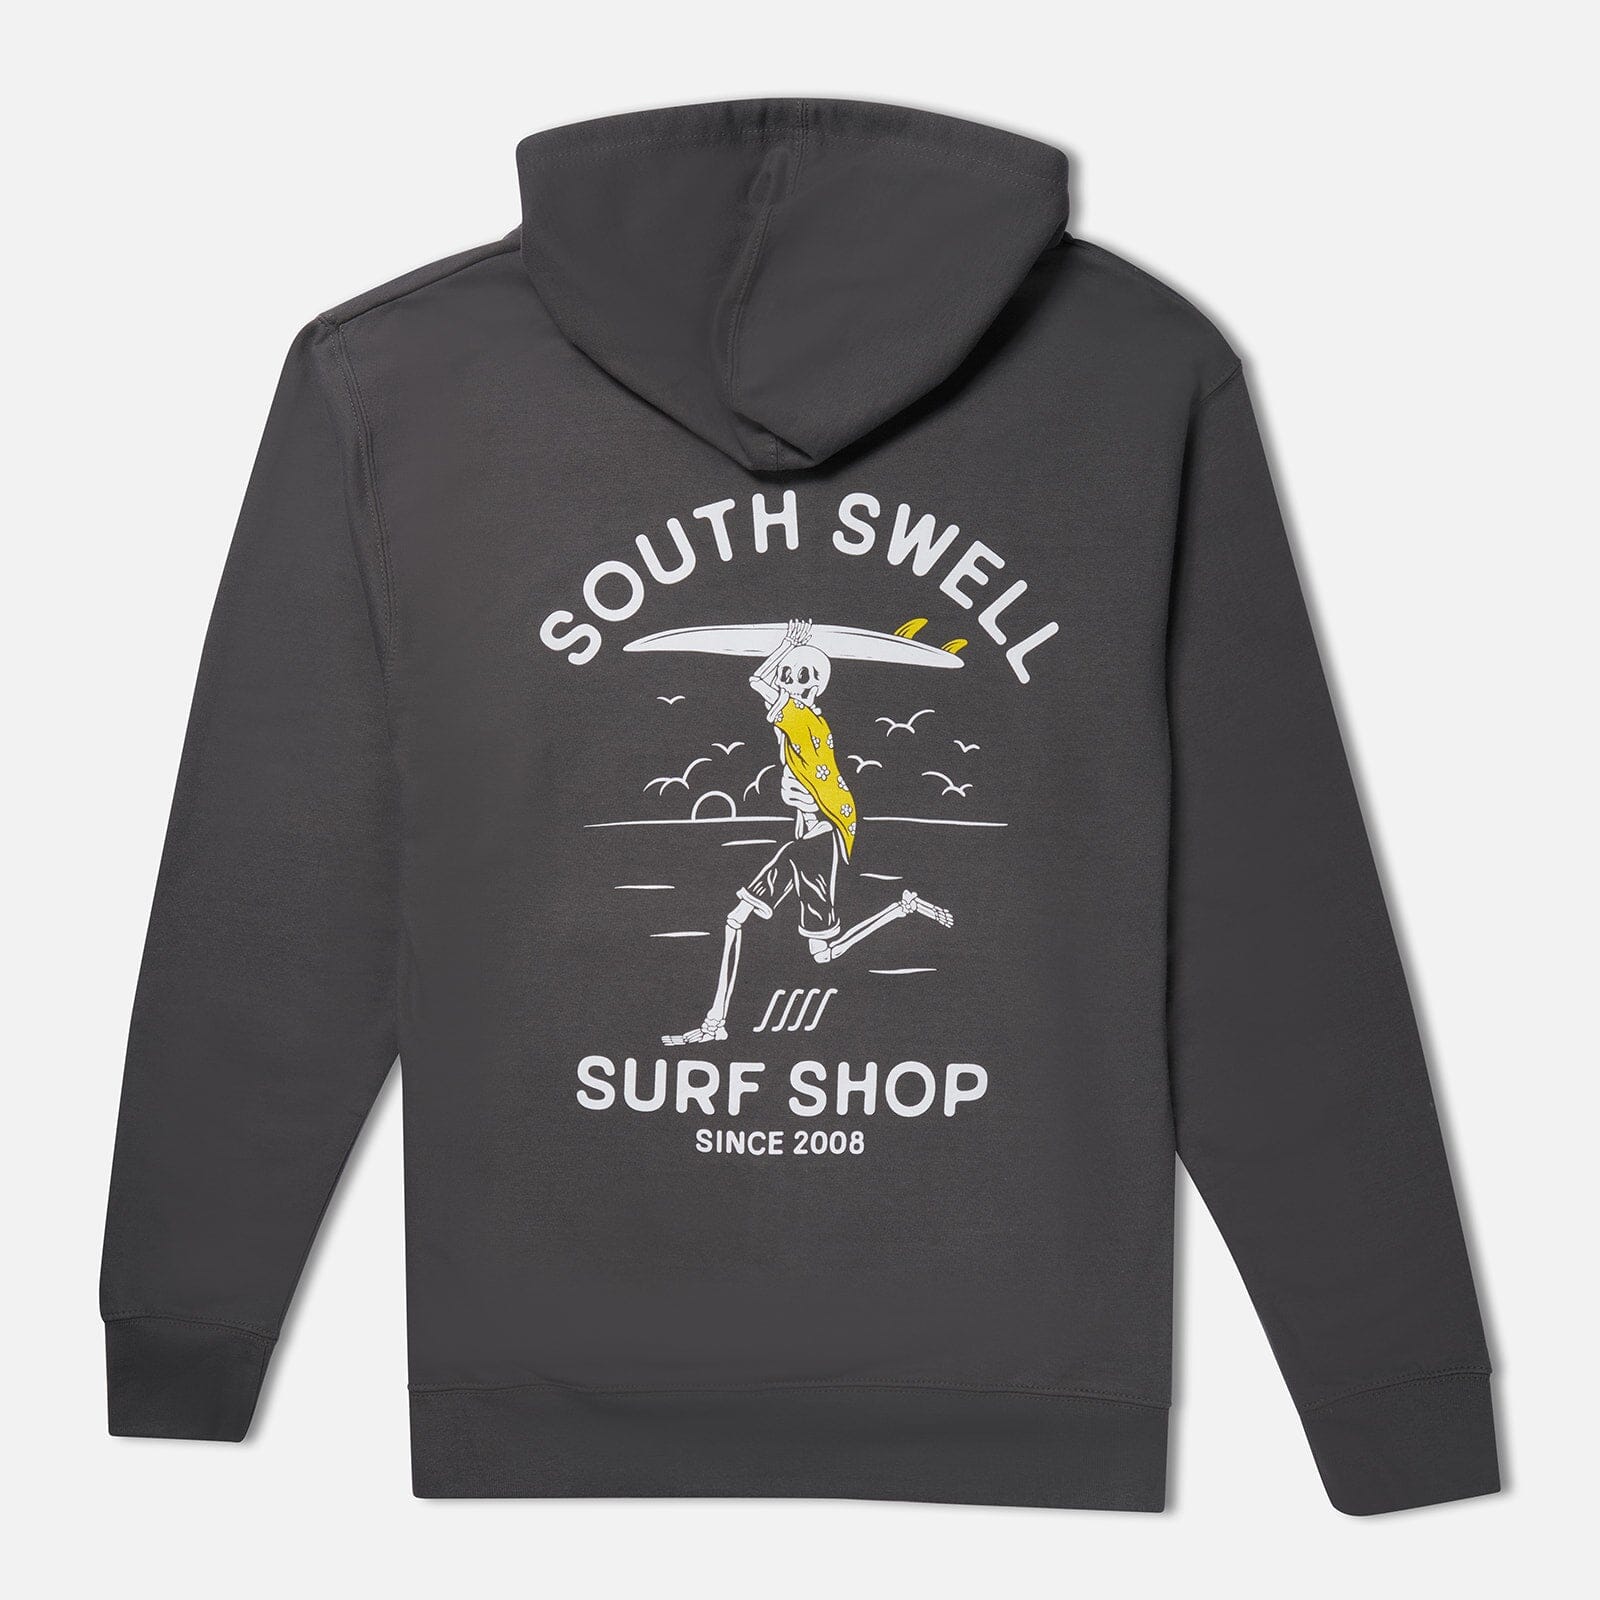 South Swell Shred Til Dead Hoodie M Sweatshirts & Hoodies SOUTH SWELL 